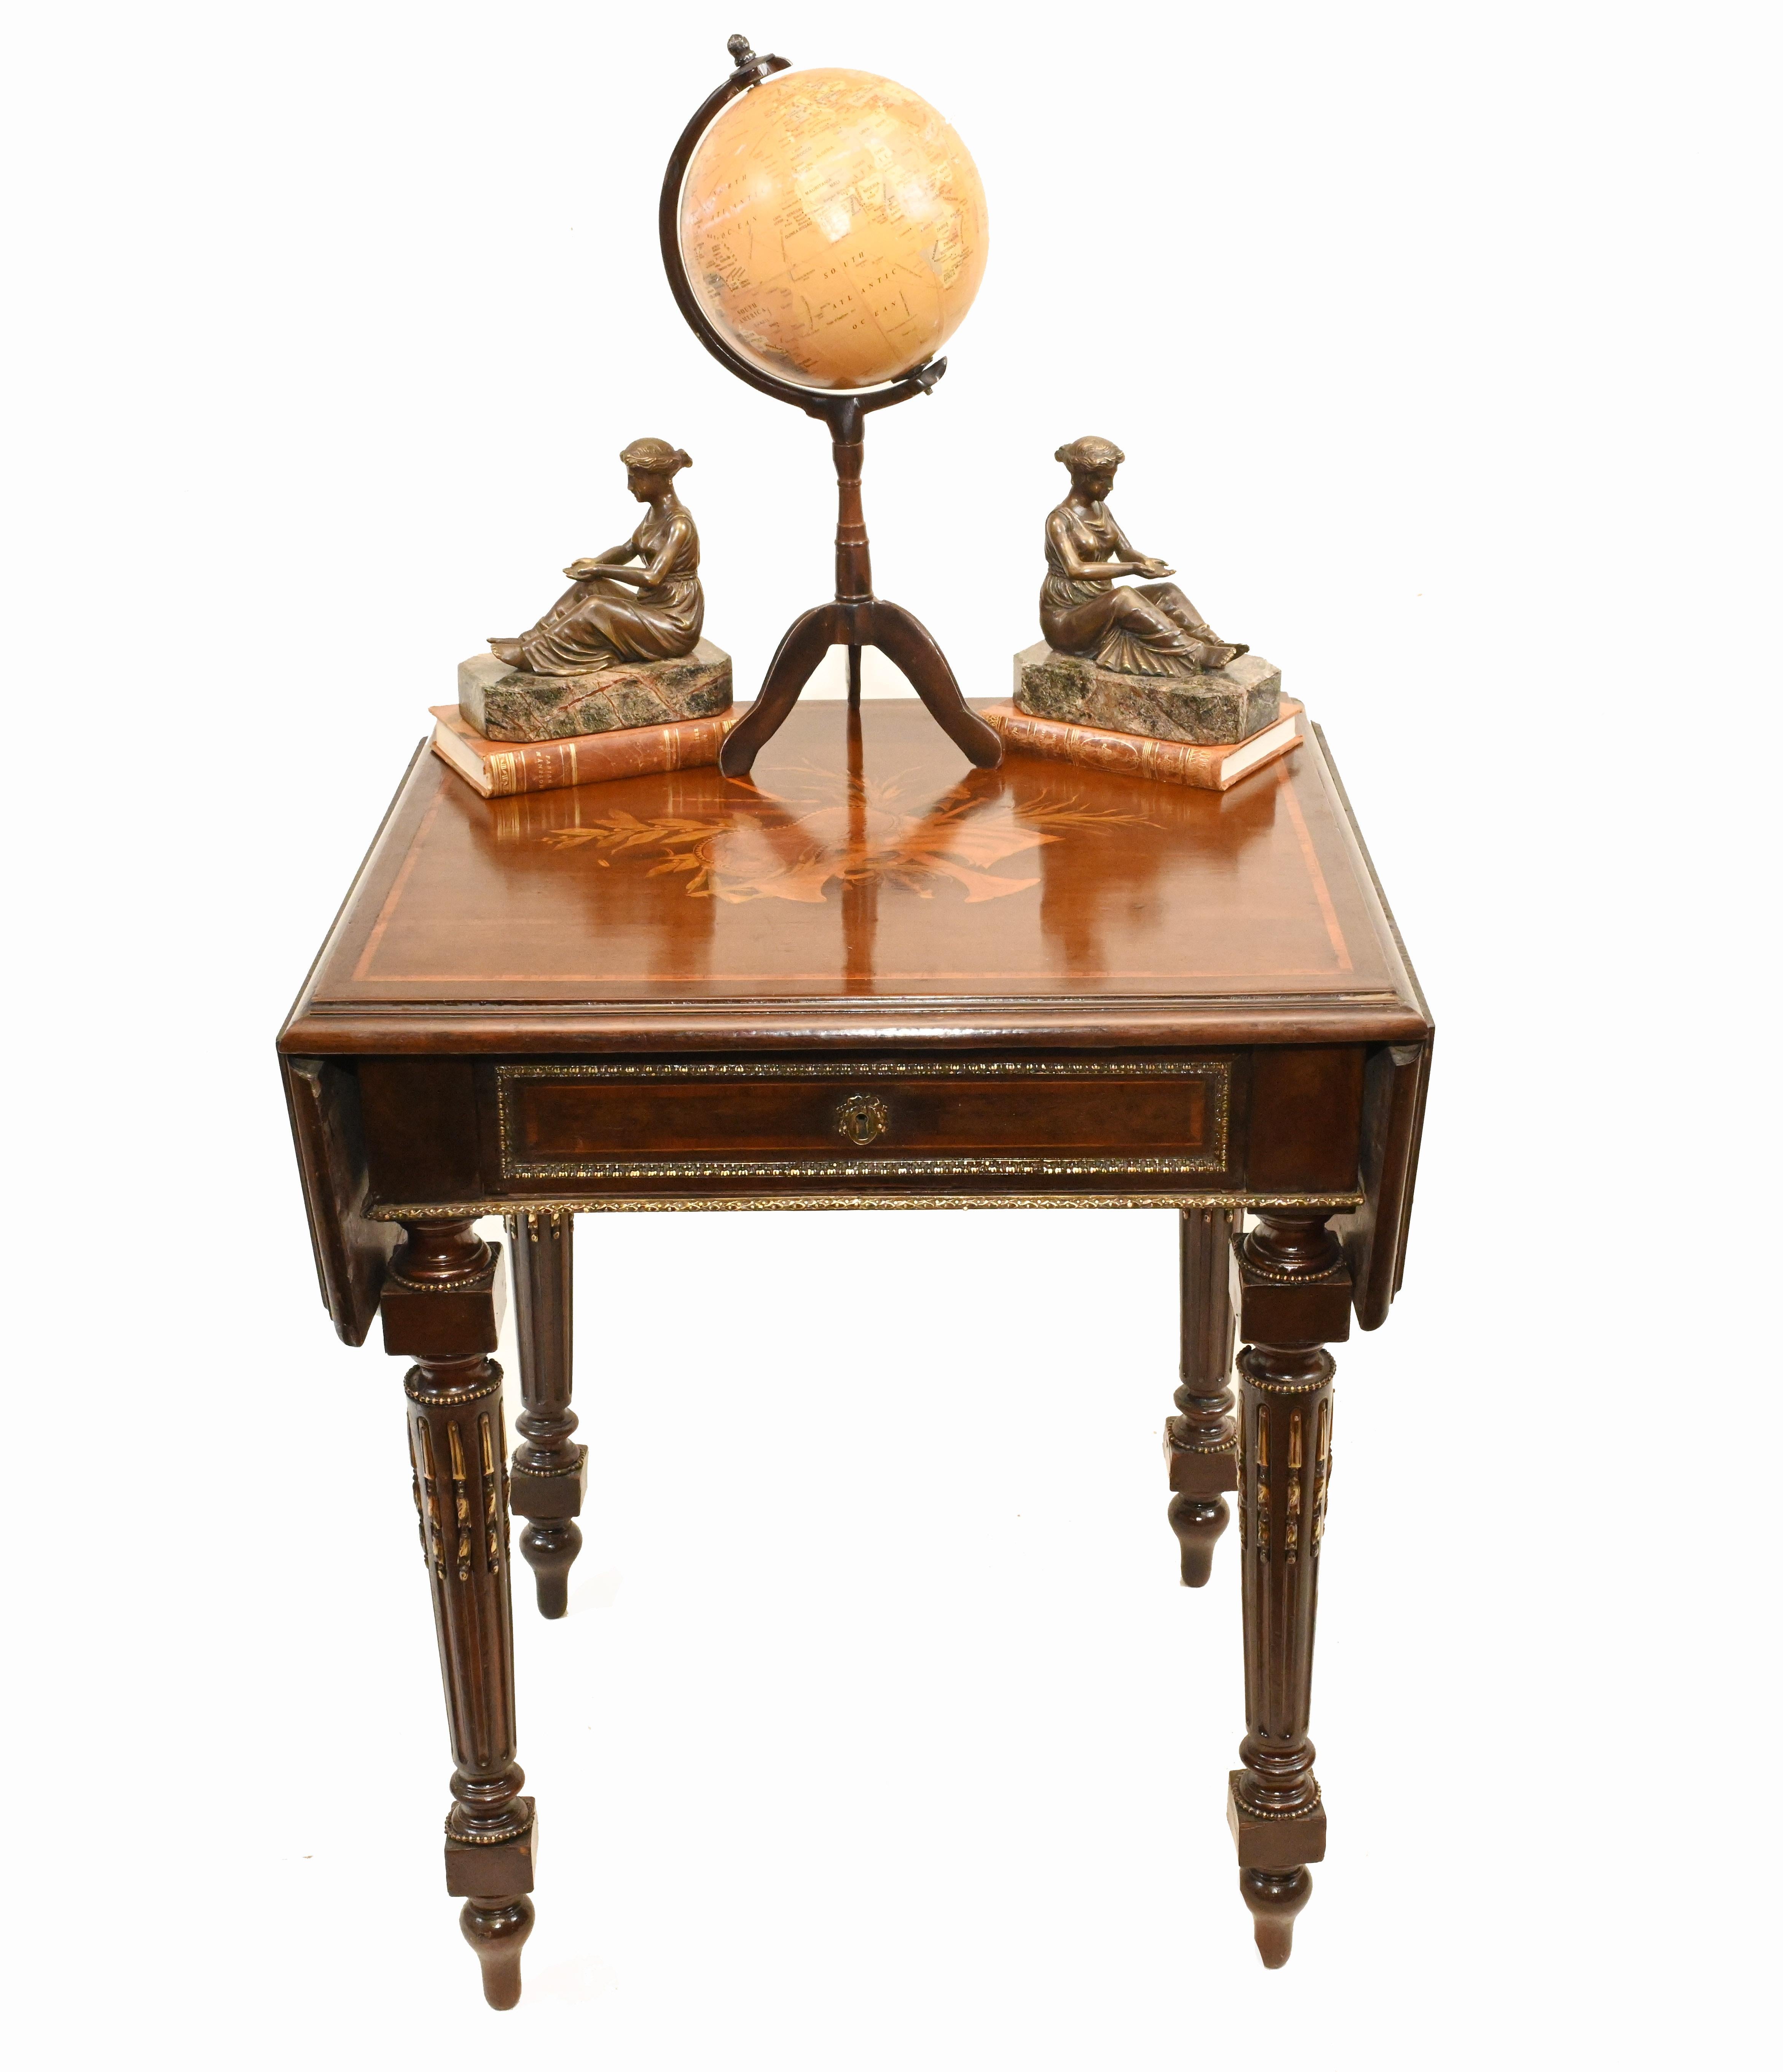 Refined French drop leaf Empire side table
Table top becomes bigger via extending with the drop leaf
Intricate marquetry inlay to the top featues floral motifs
Bought from a dealer on Marche Biron at Paris antiques markets
Offered in great shape